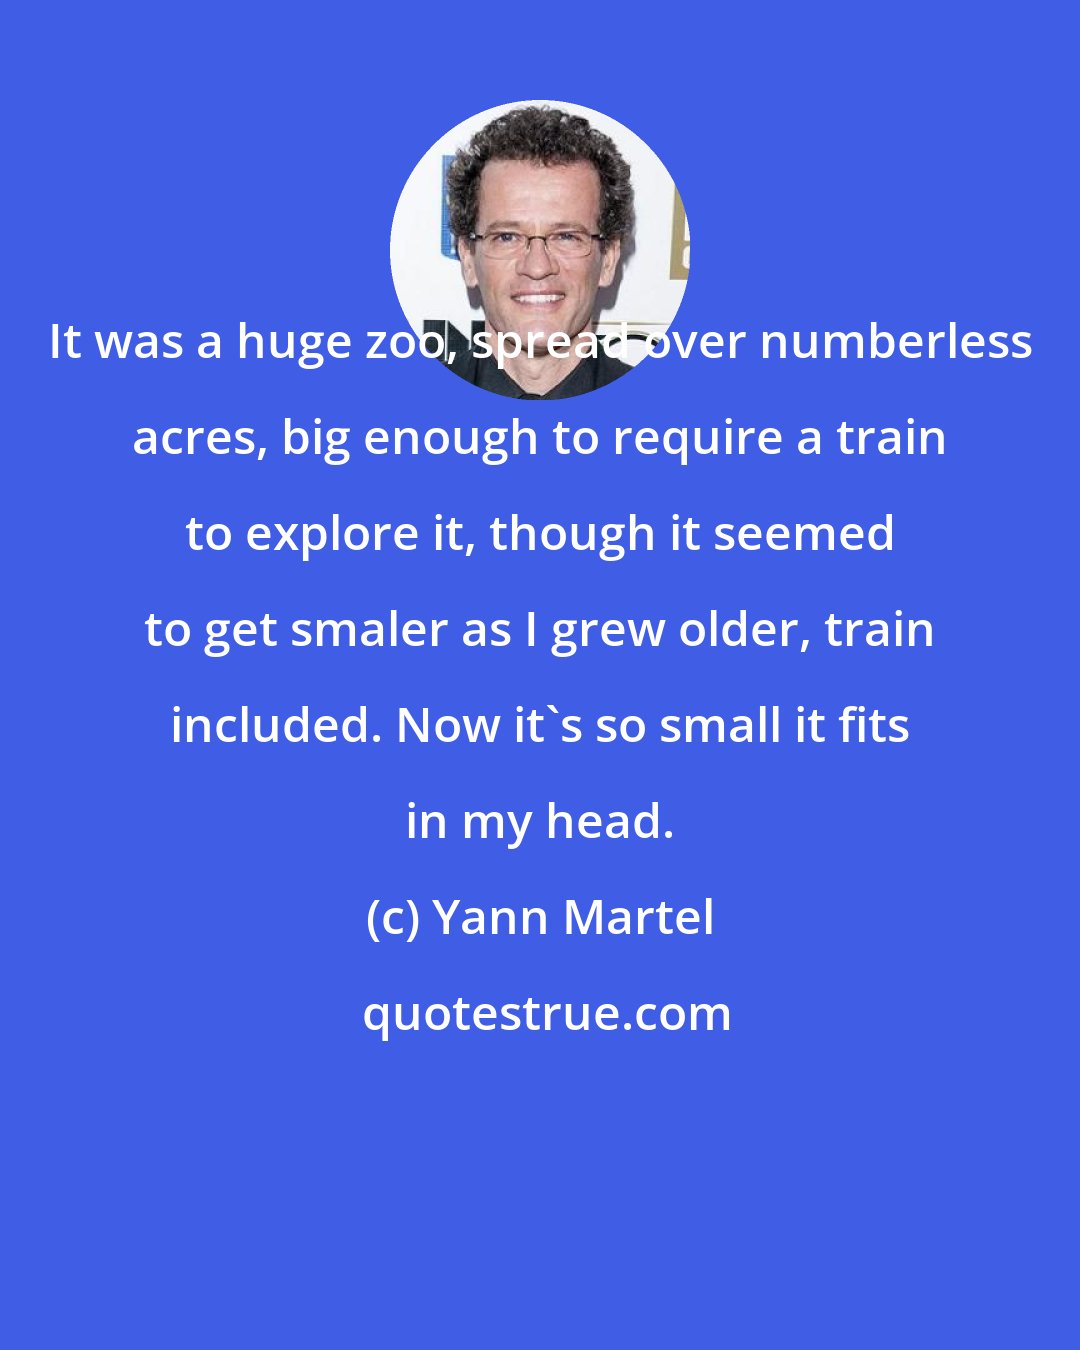 Yann Martel: It was a huge zoo, spread over numberless acres, big enough to require a train to explore it, though it seemed to get smaler as I grew older, train included. Now it's so small it fits in my head.